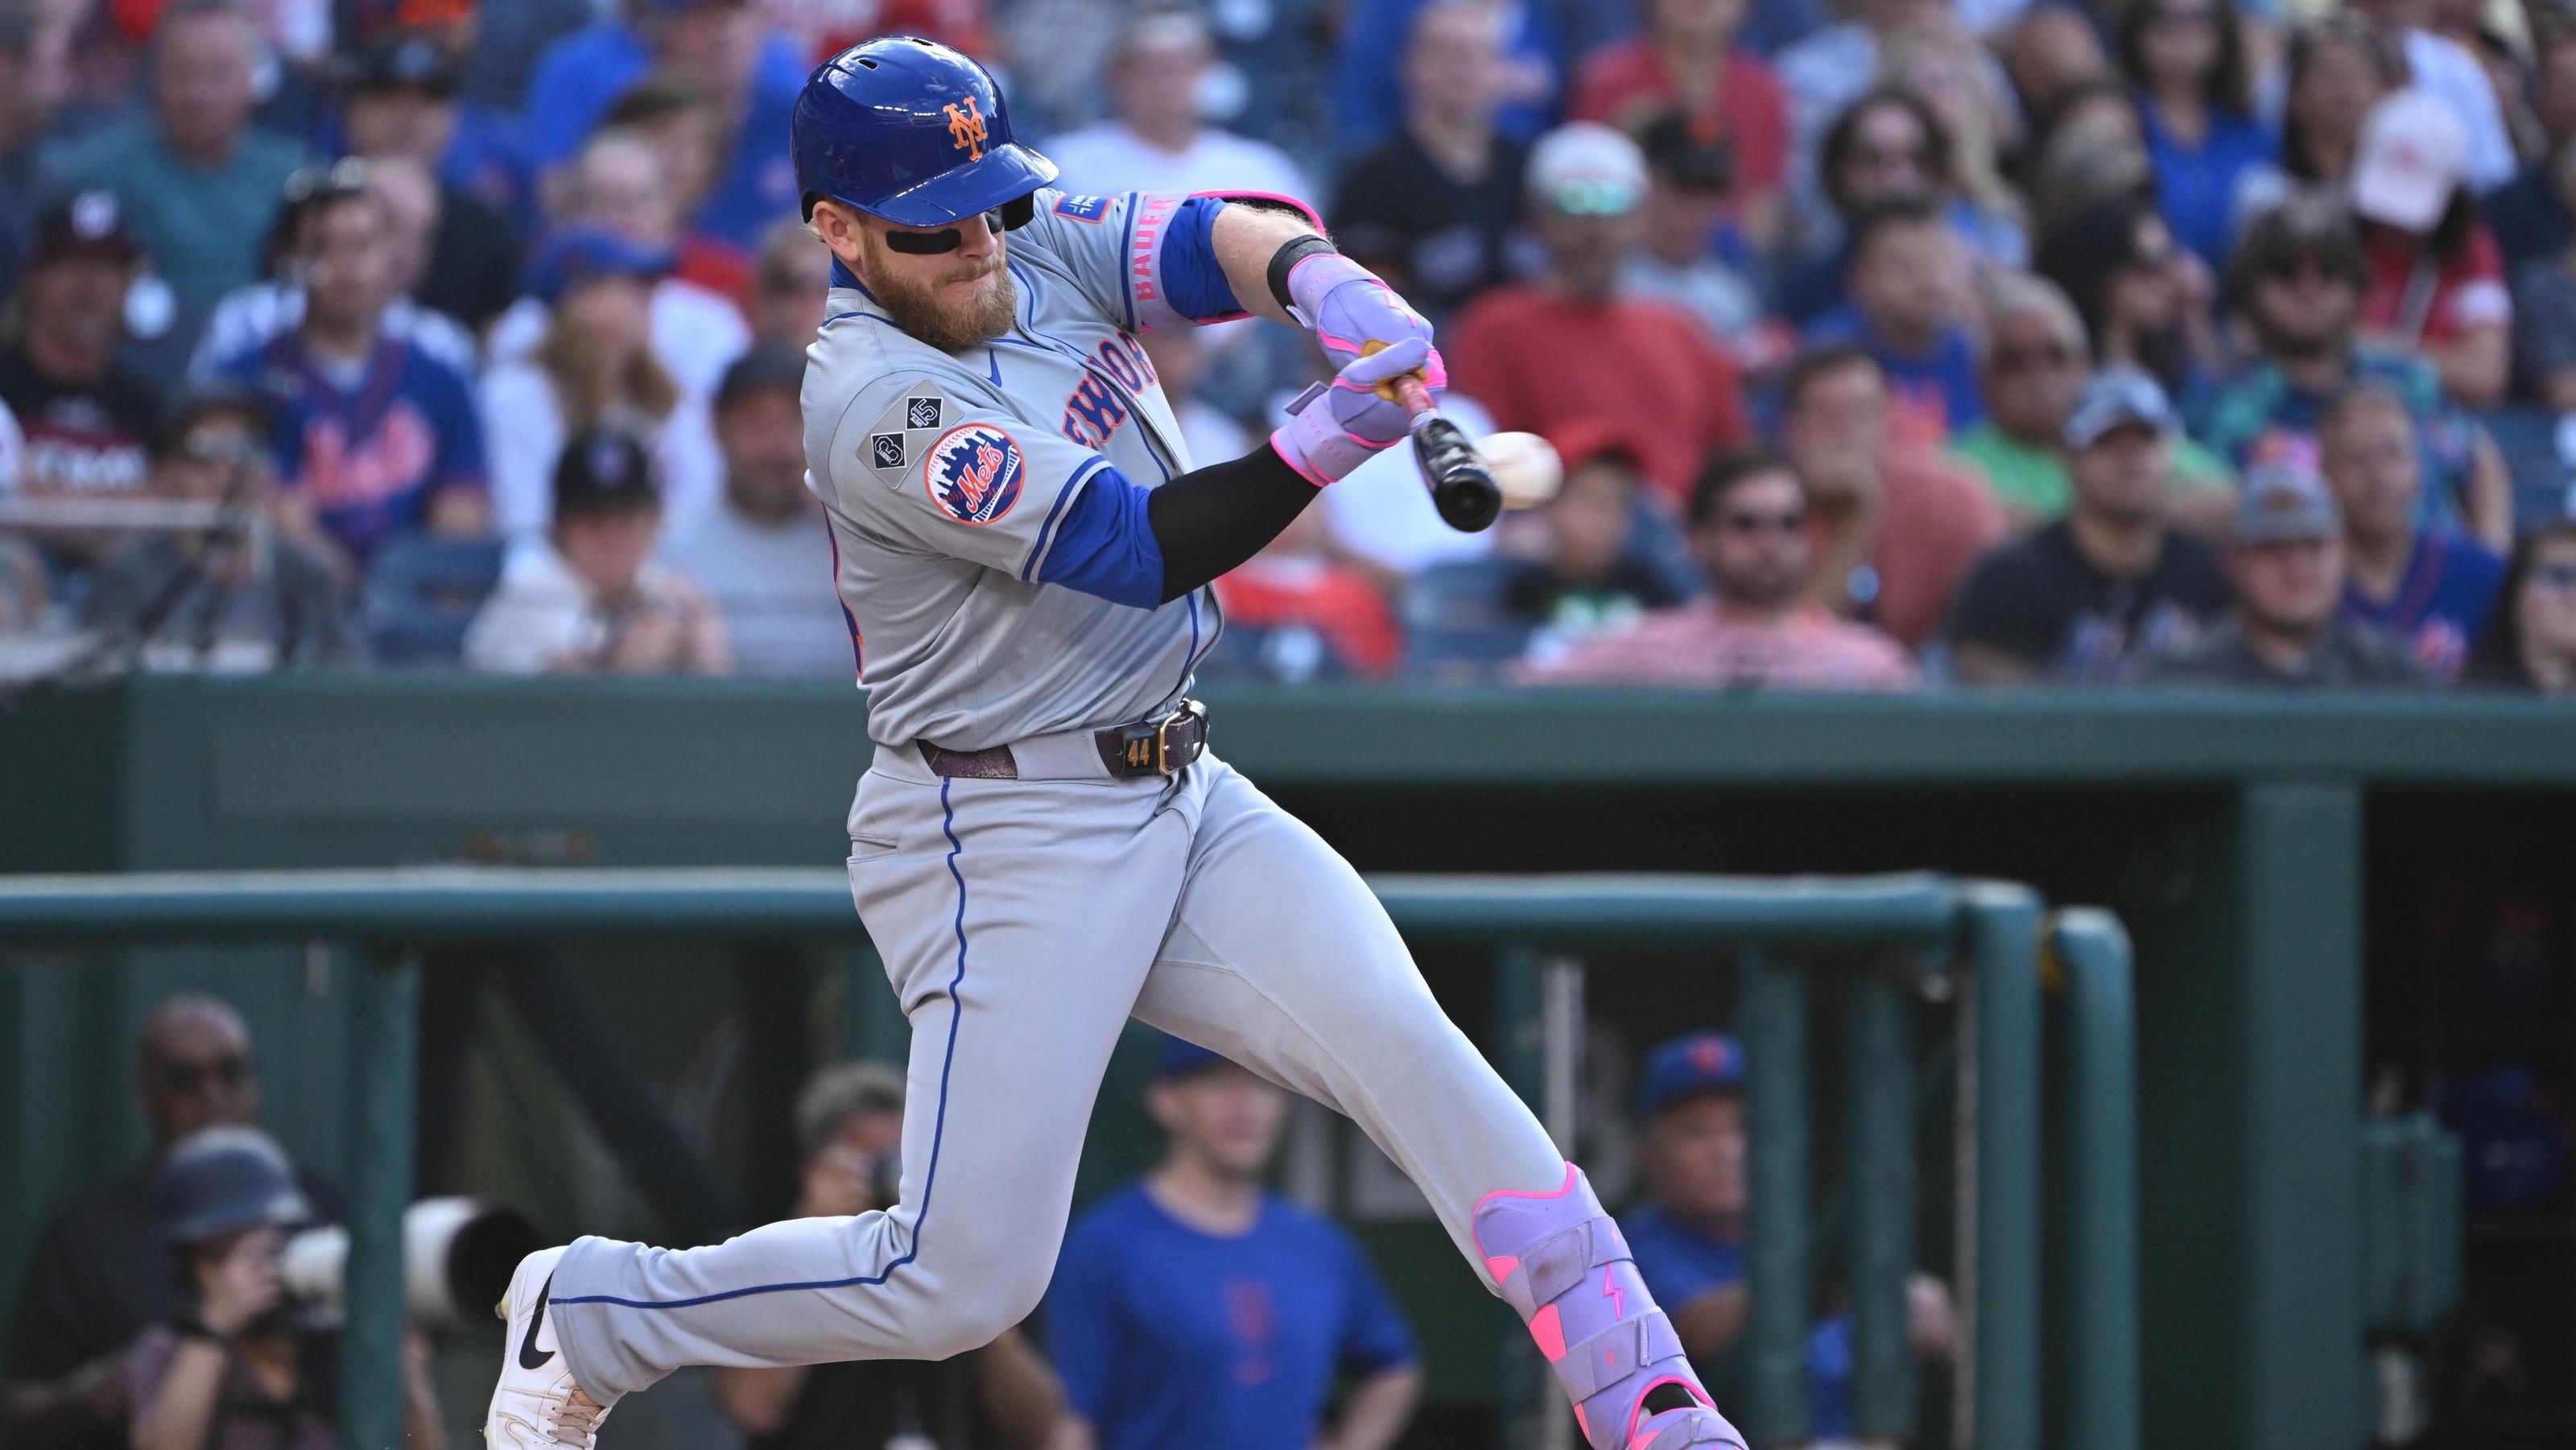 Mets score six runs in 10th inning to beat Nationals, 9-7, in extras